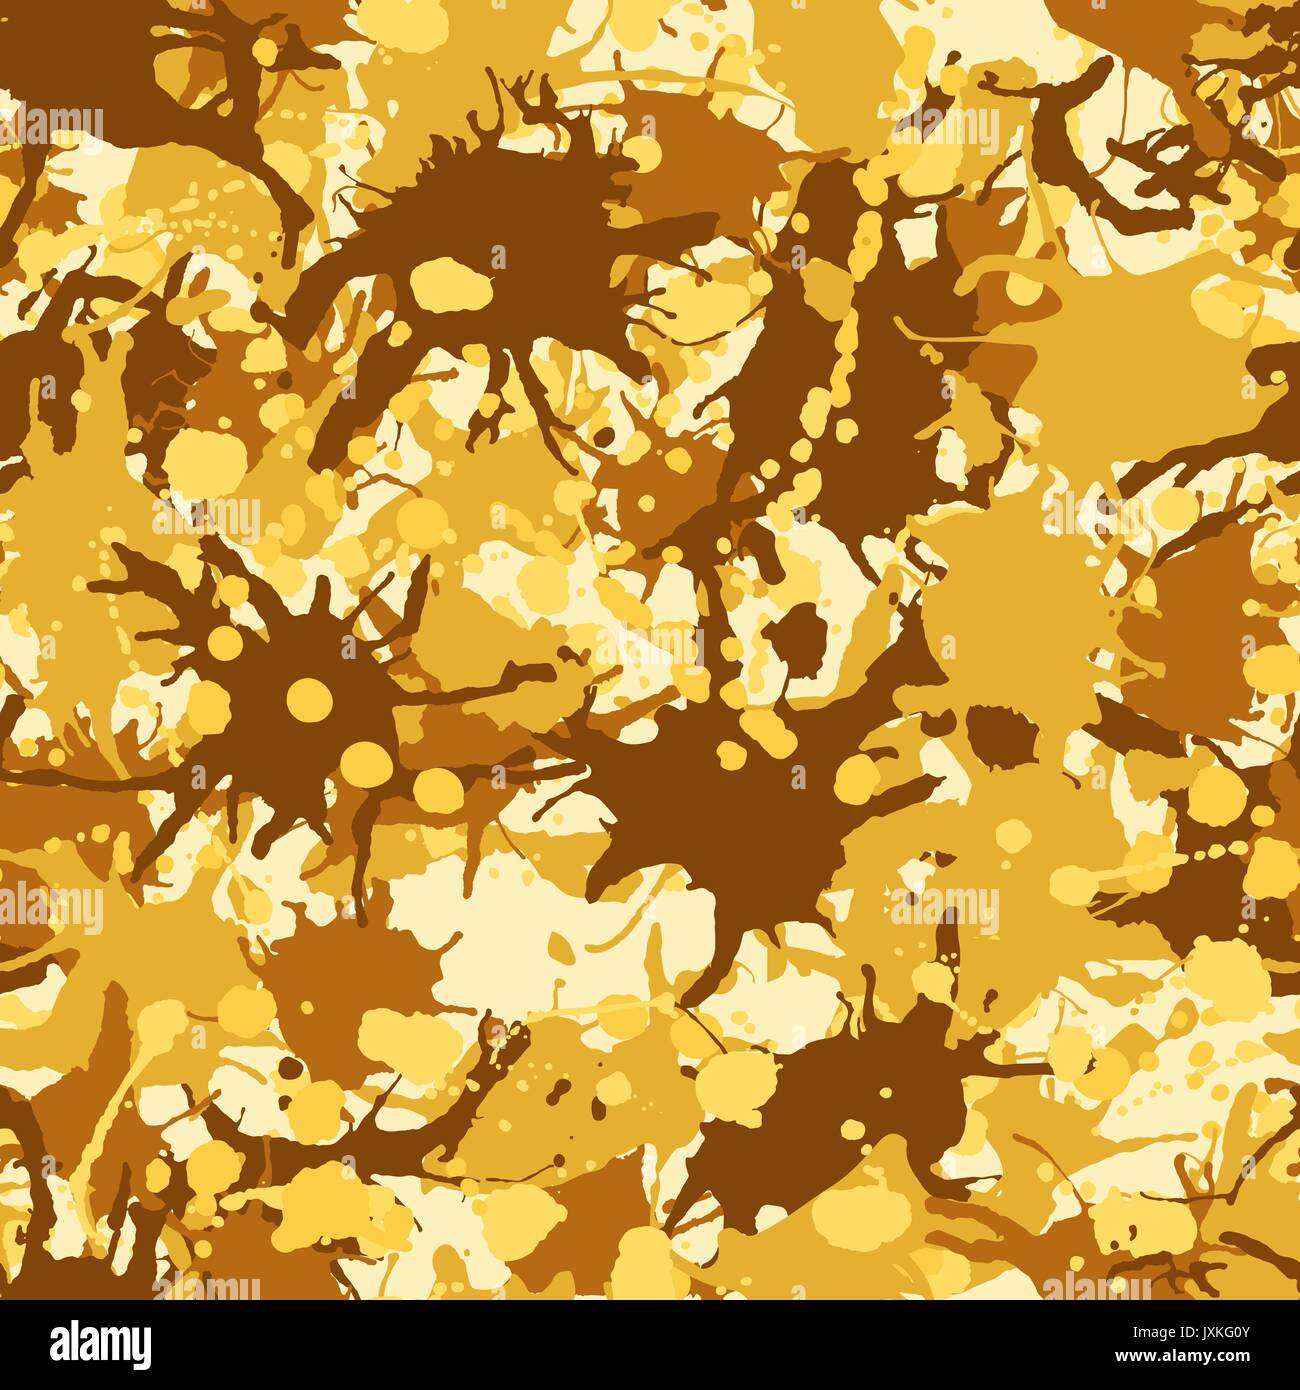 Yellow brown artistic ink paint splashes seamless pattern vector Stock Vector